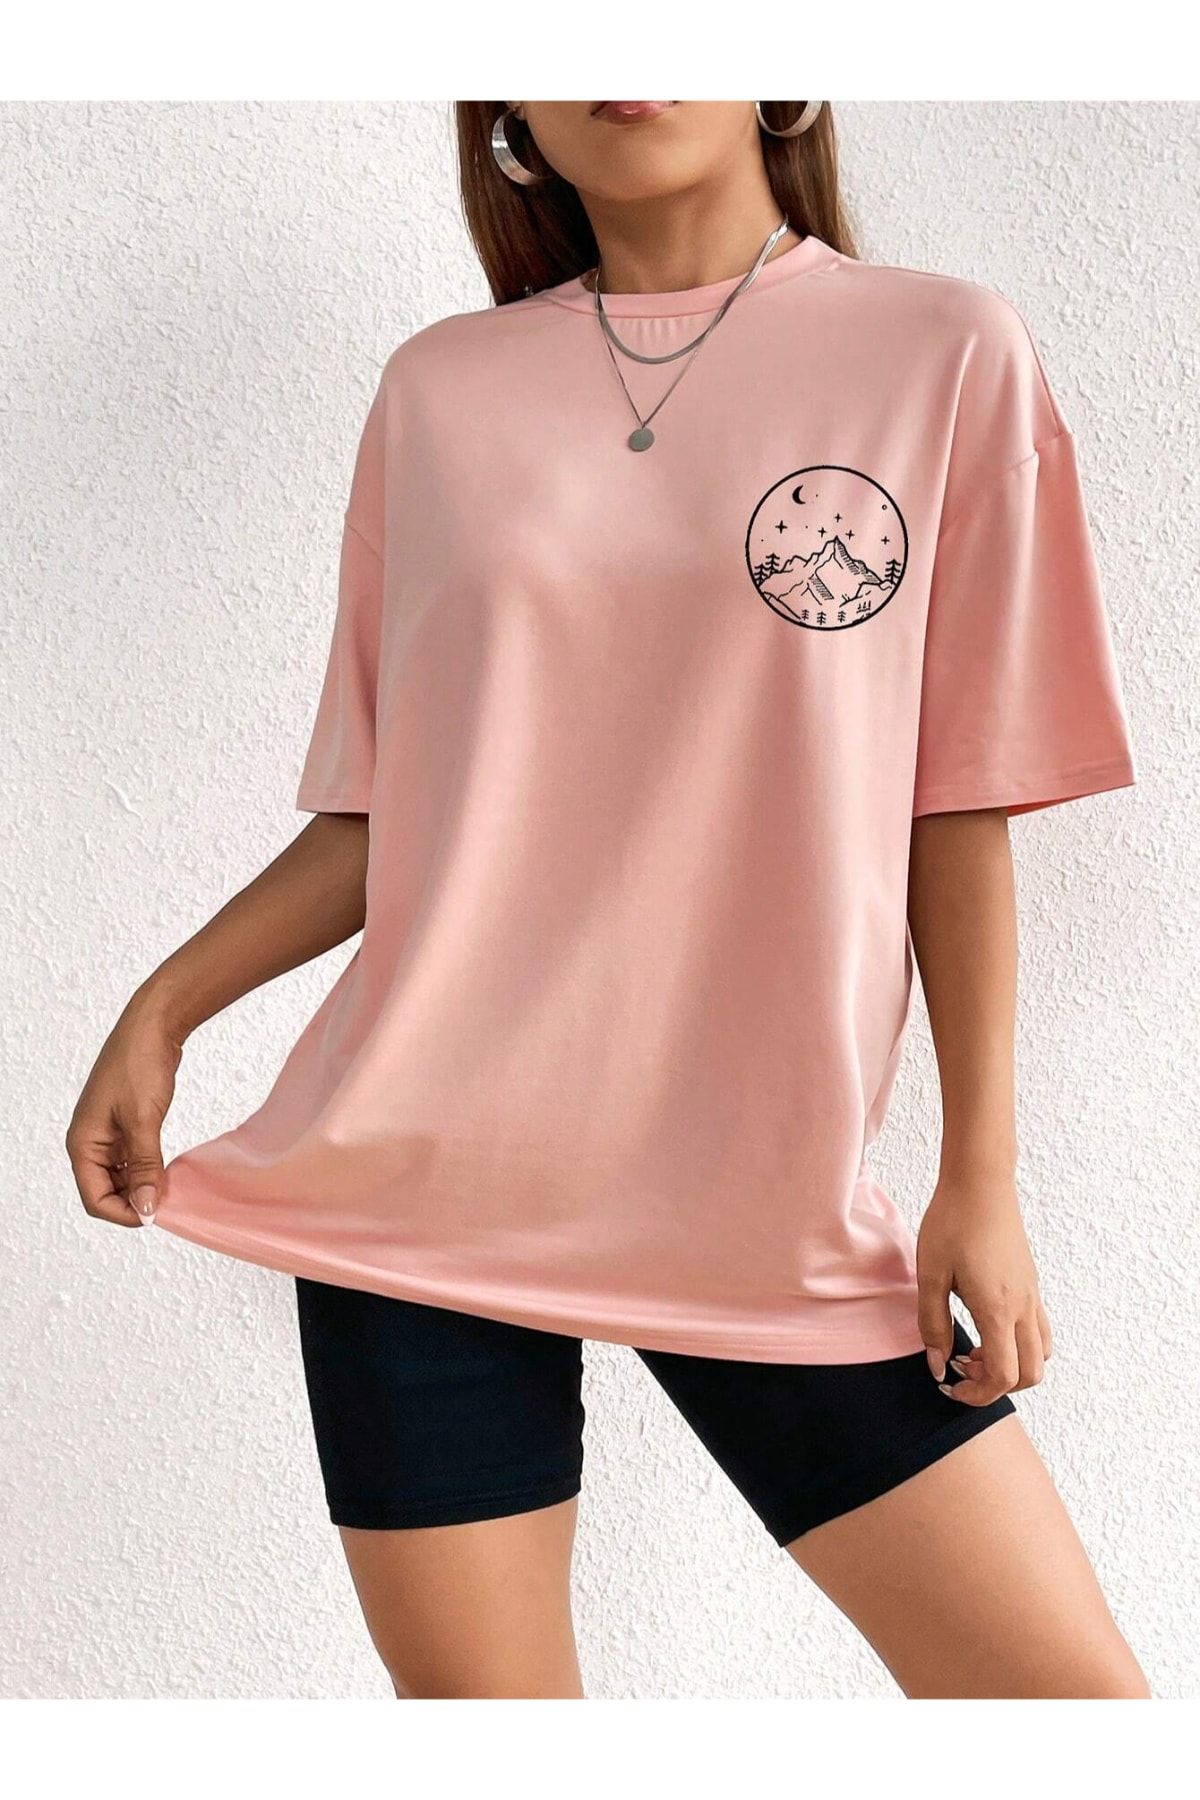 Moda Rapido - By Myntra Casual T-Shirts For Women Rose Short Sleeves  Regular Solid Pure Cotton Round Neck Ready to Wear T-shirt Clothing